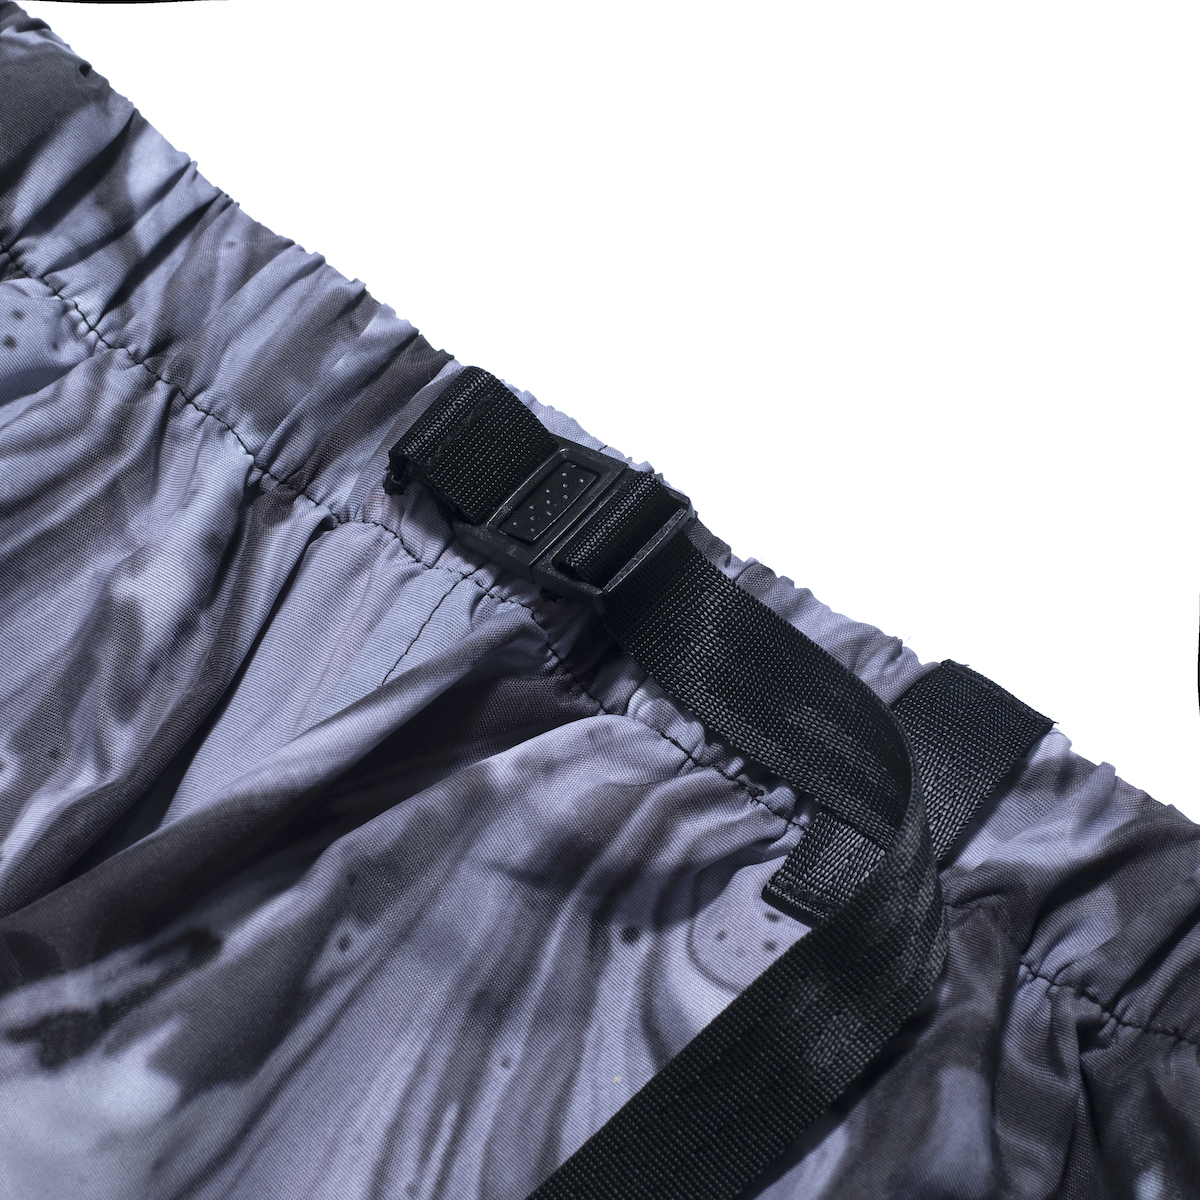 Miles Trackpants Printed Marble